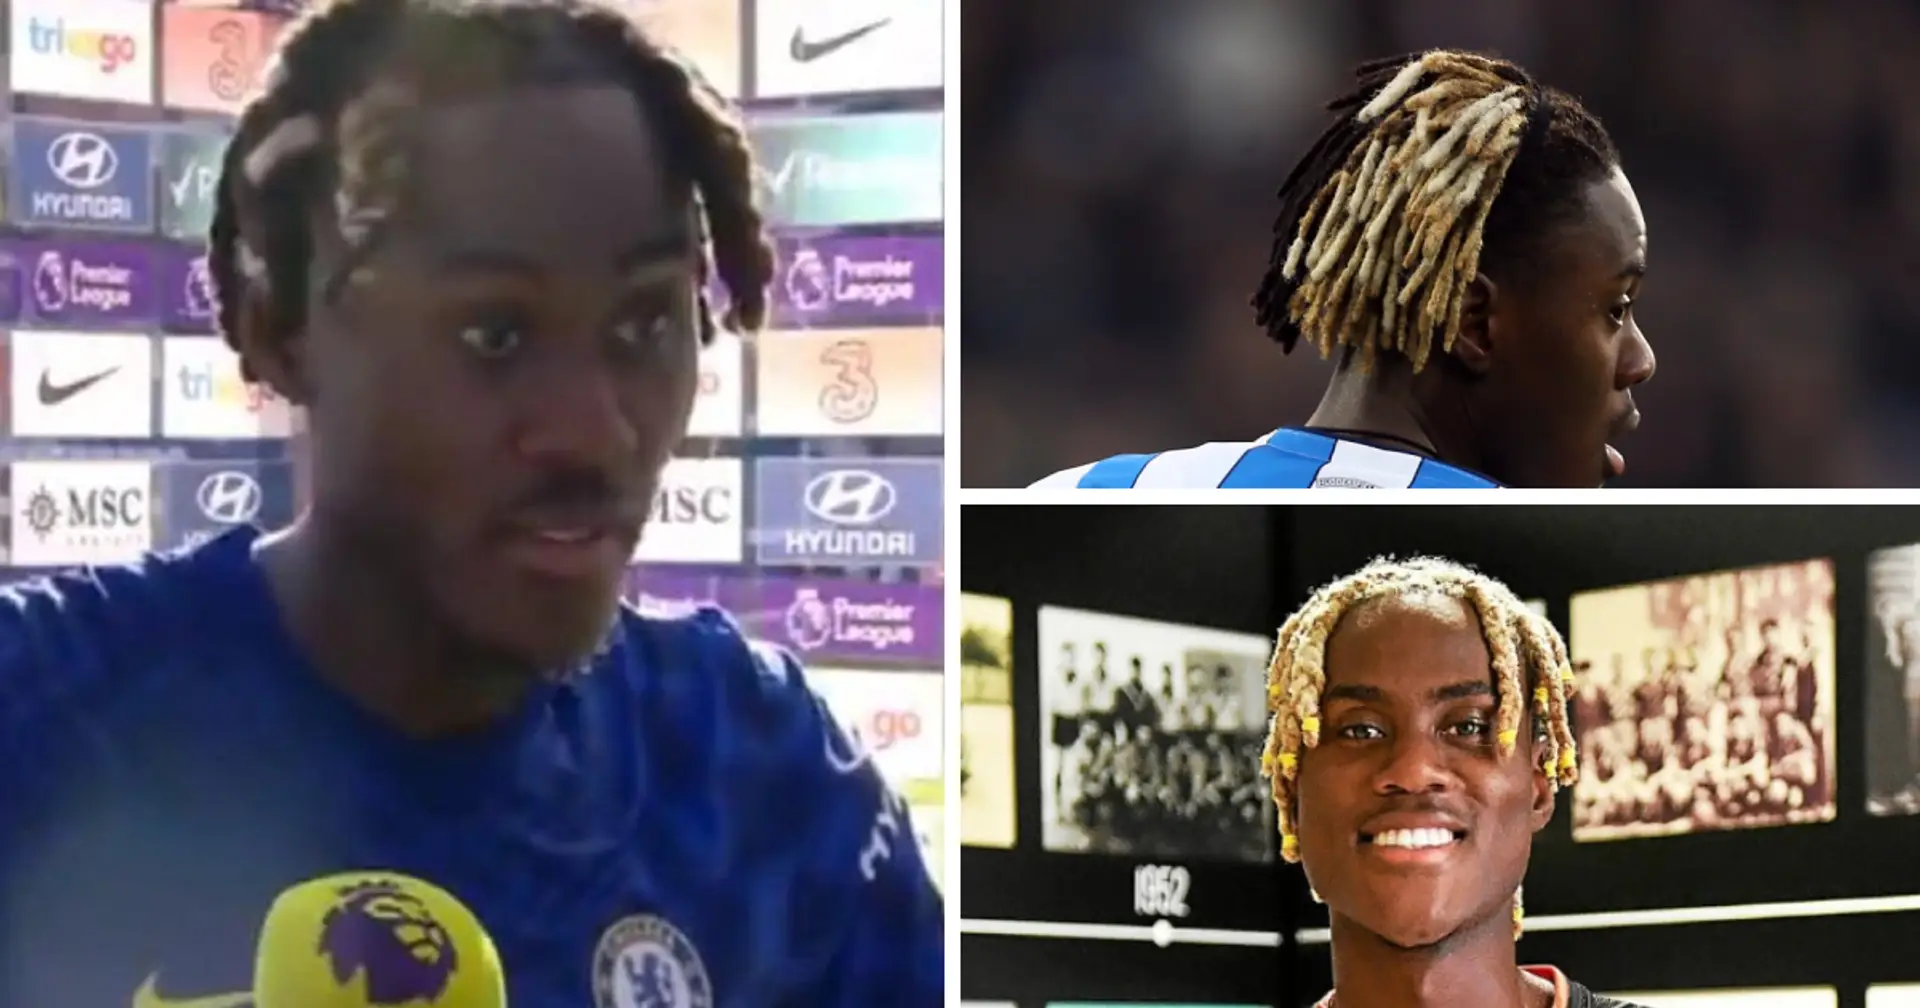 'If Chelsea win a trophy': Chalobah makes hairstyle promise